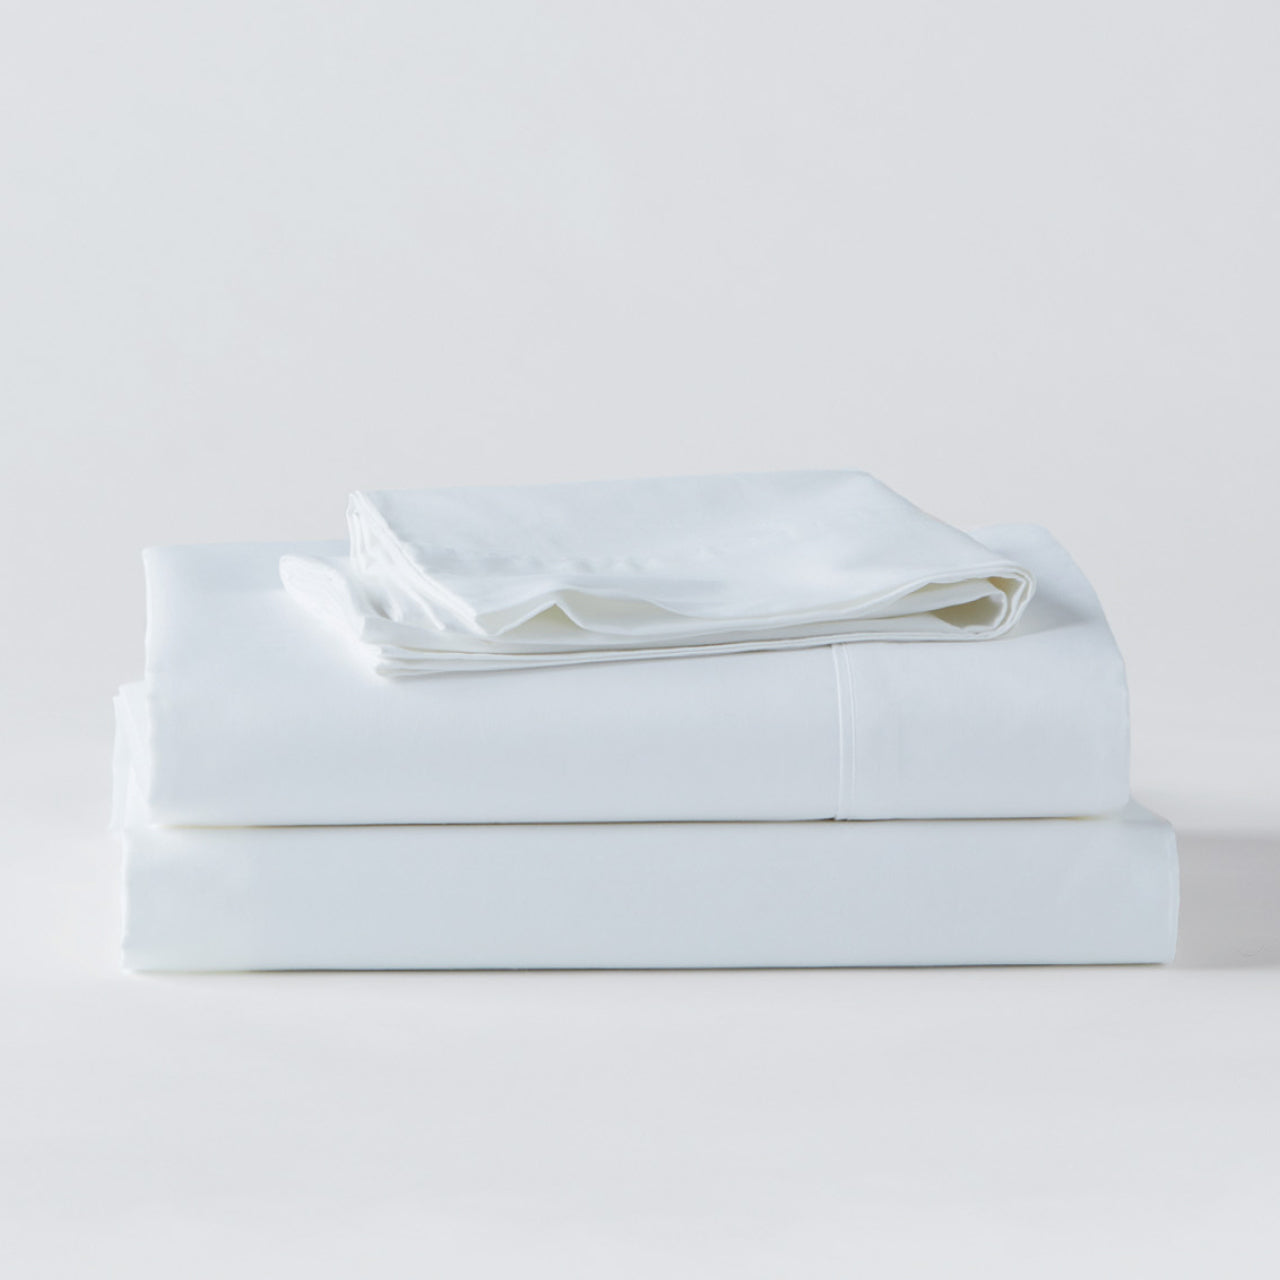 Cotton White Sheets folded up on floor